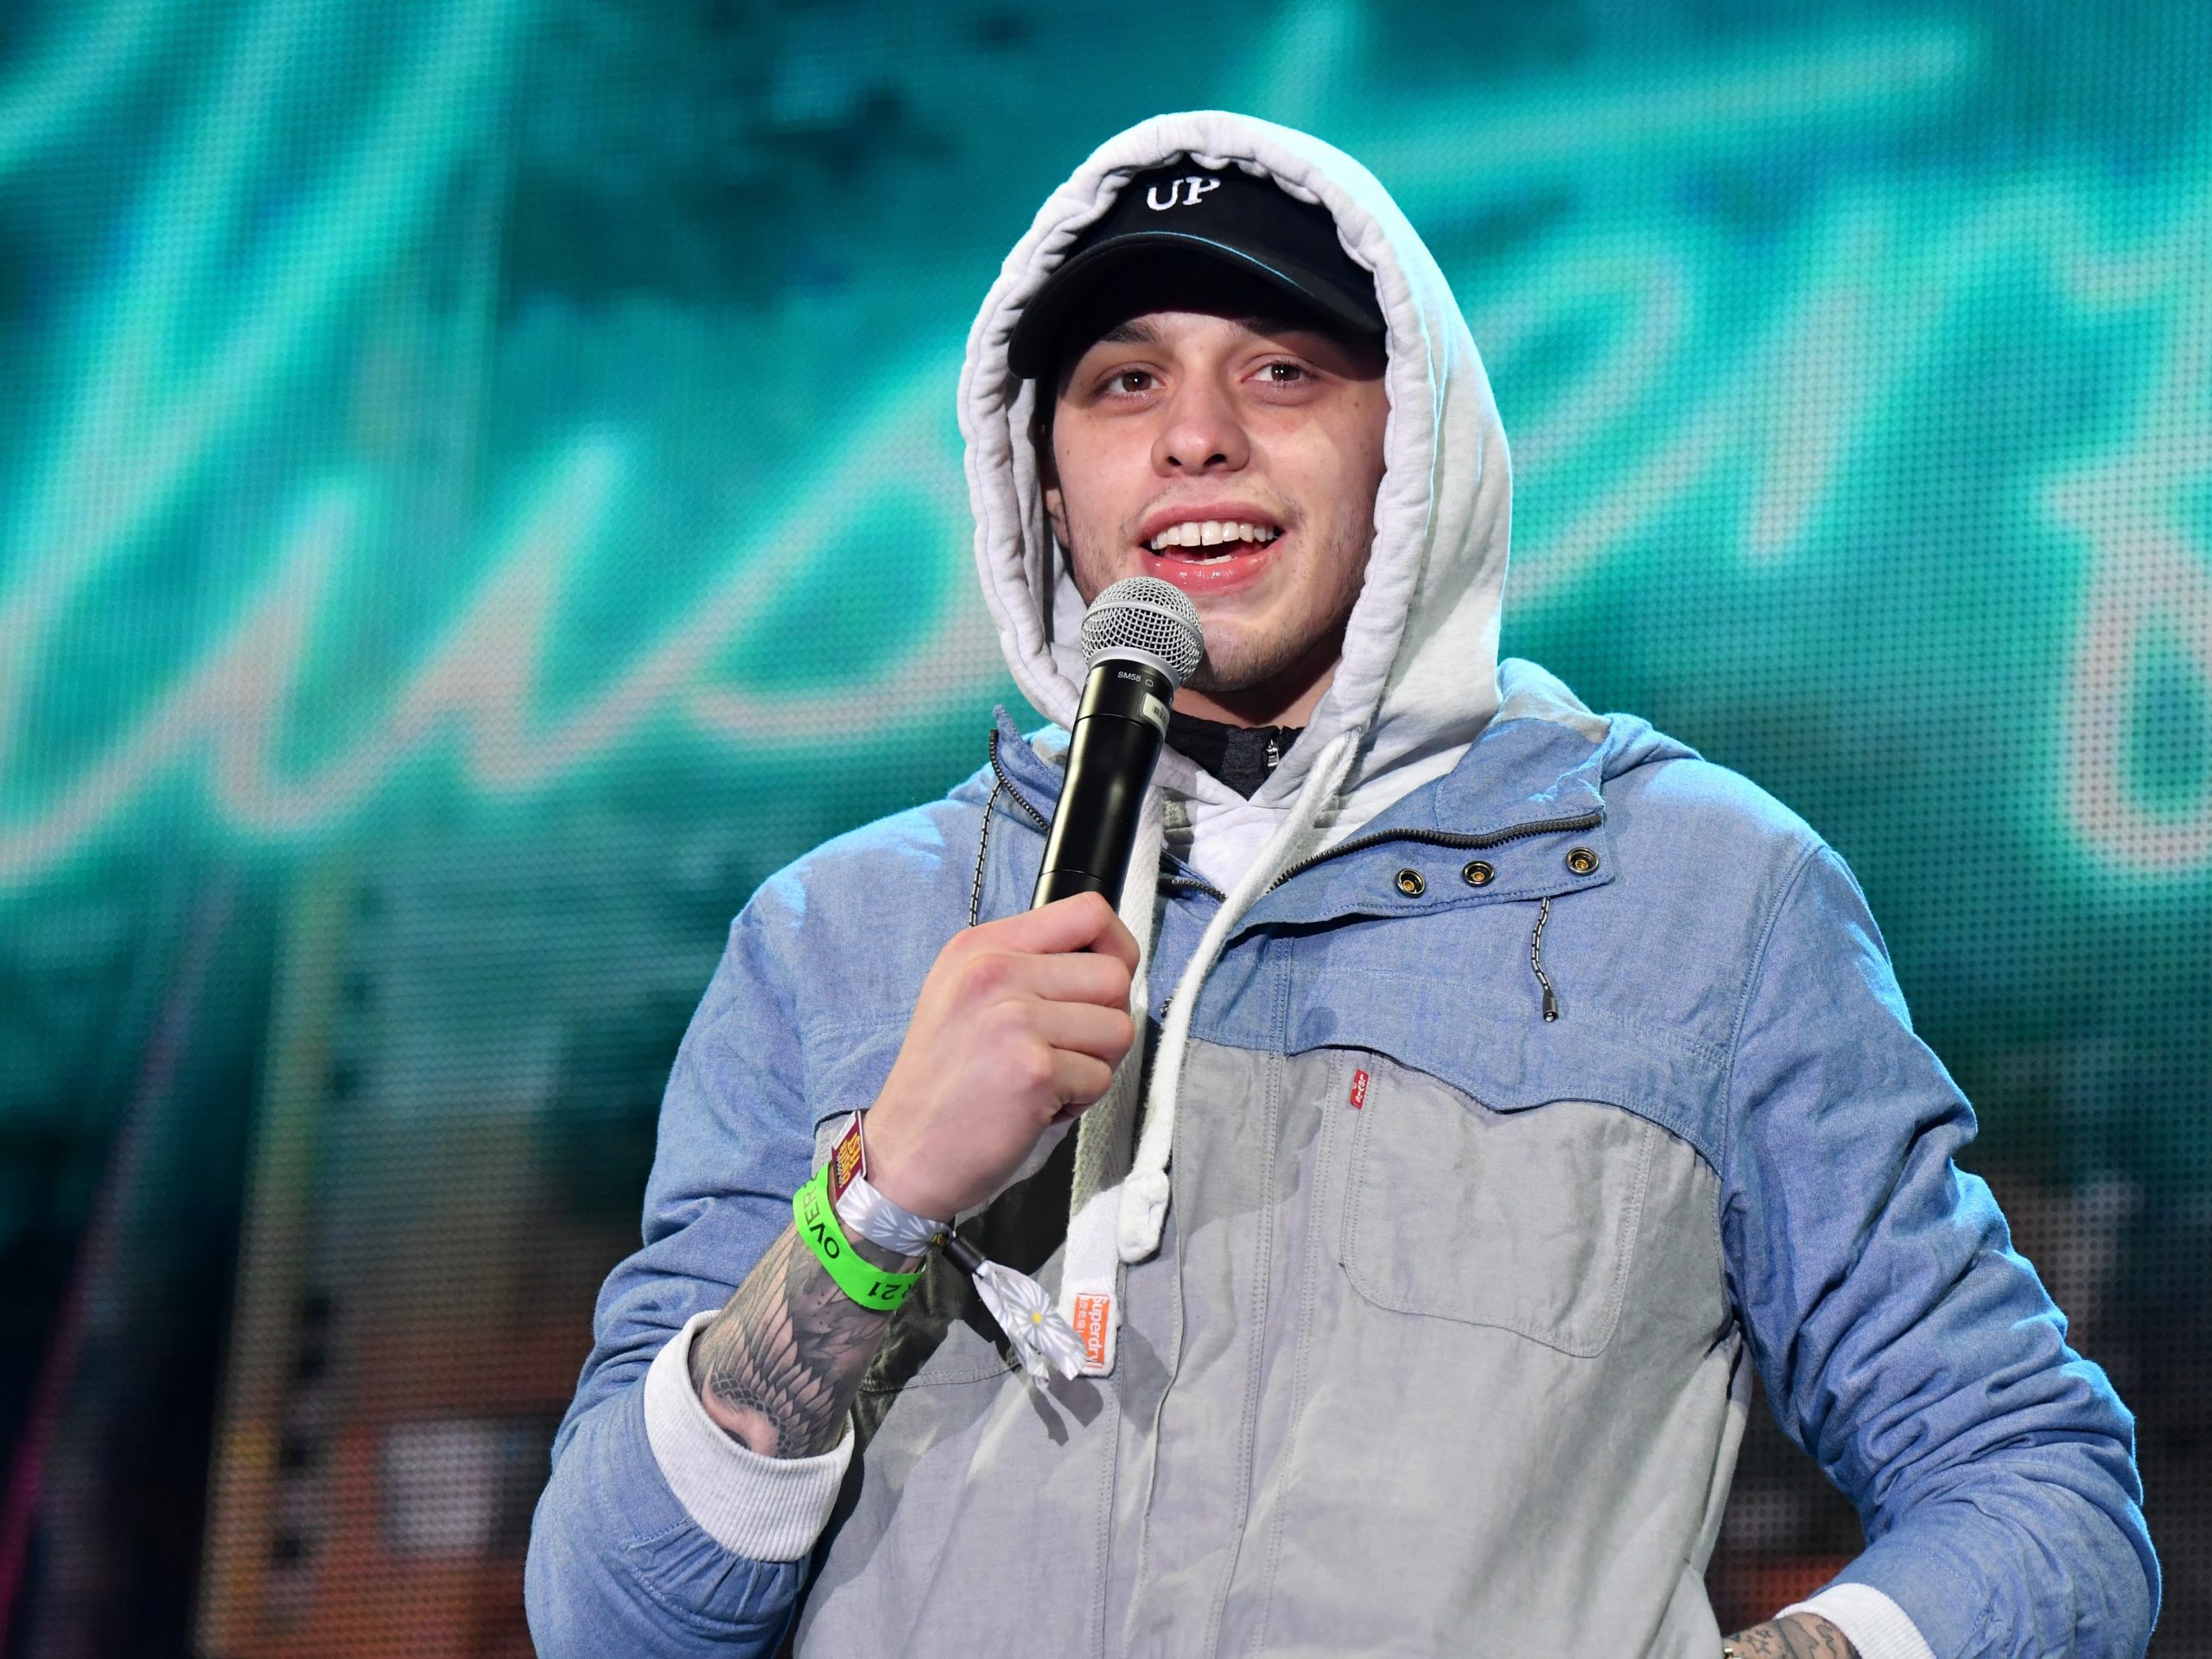 Pete Davidson performs onstage at the Colossal Stage during Colossal Clusterfest.